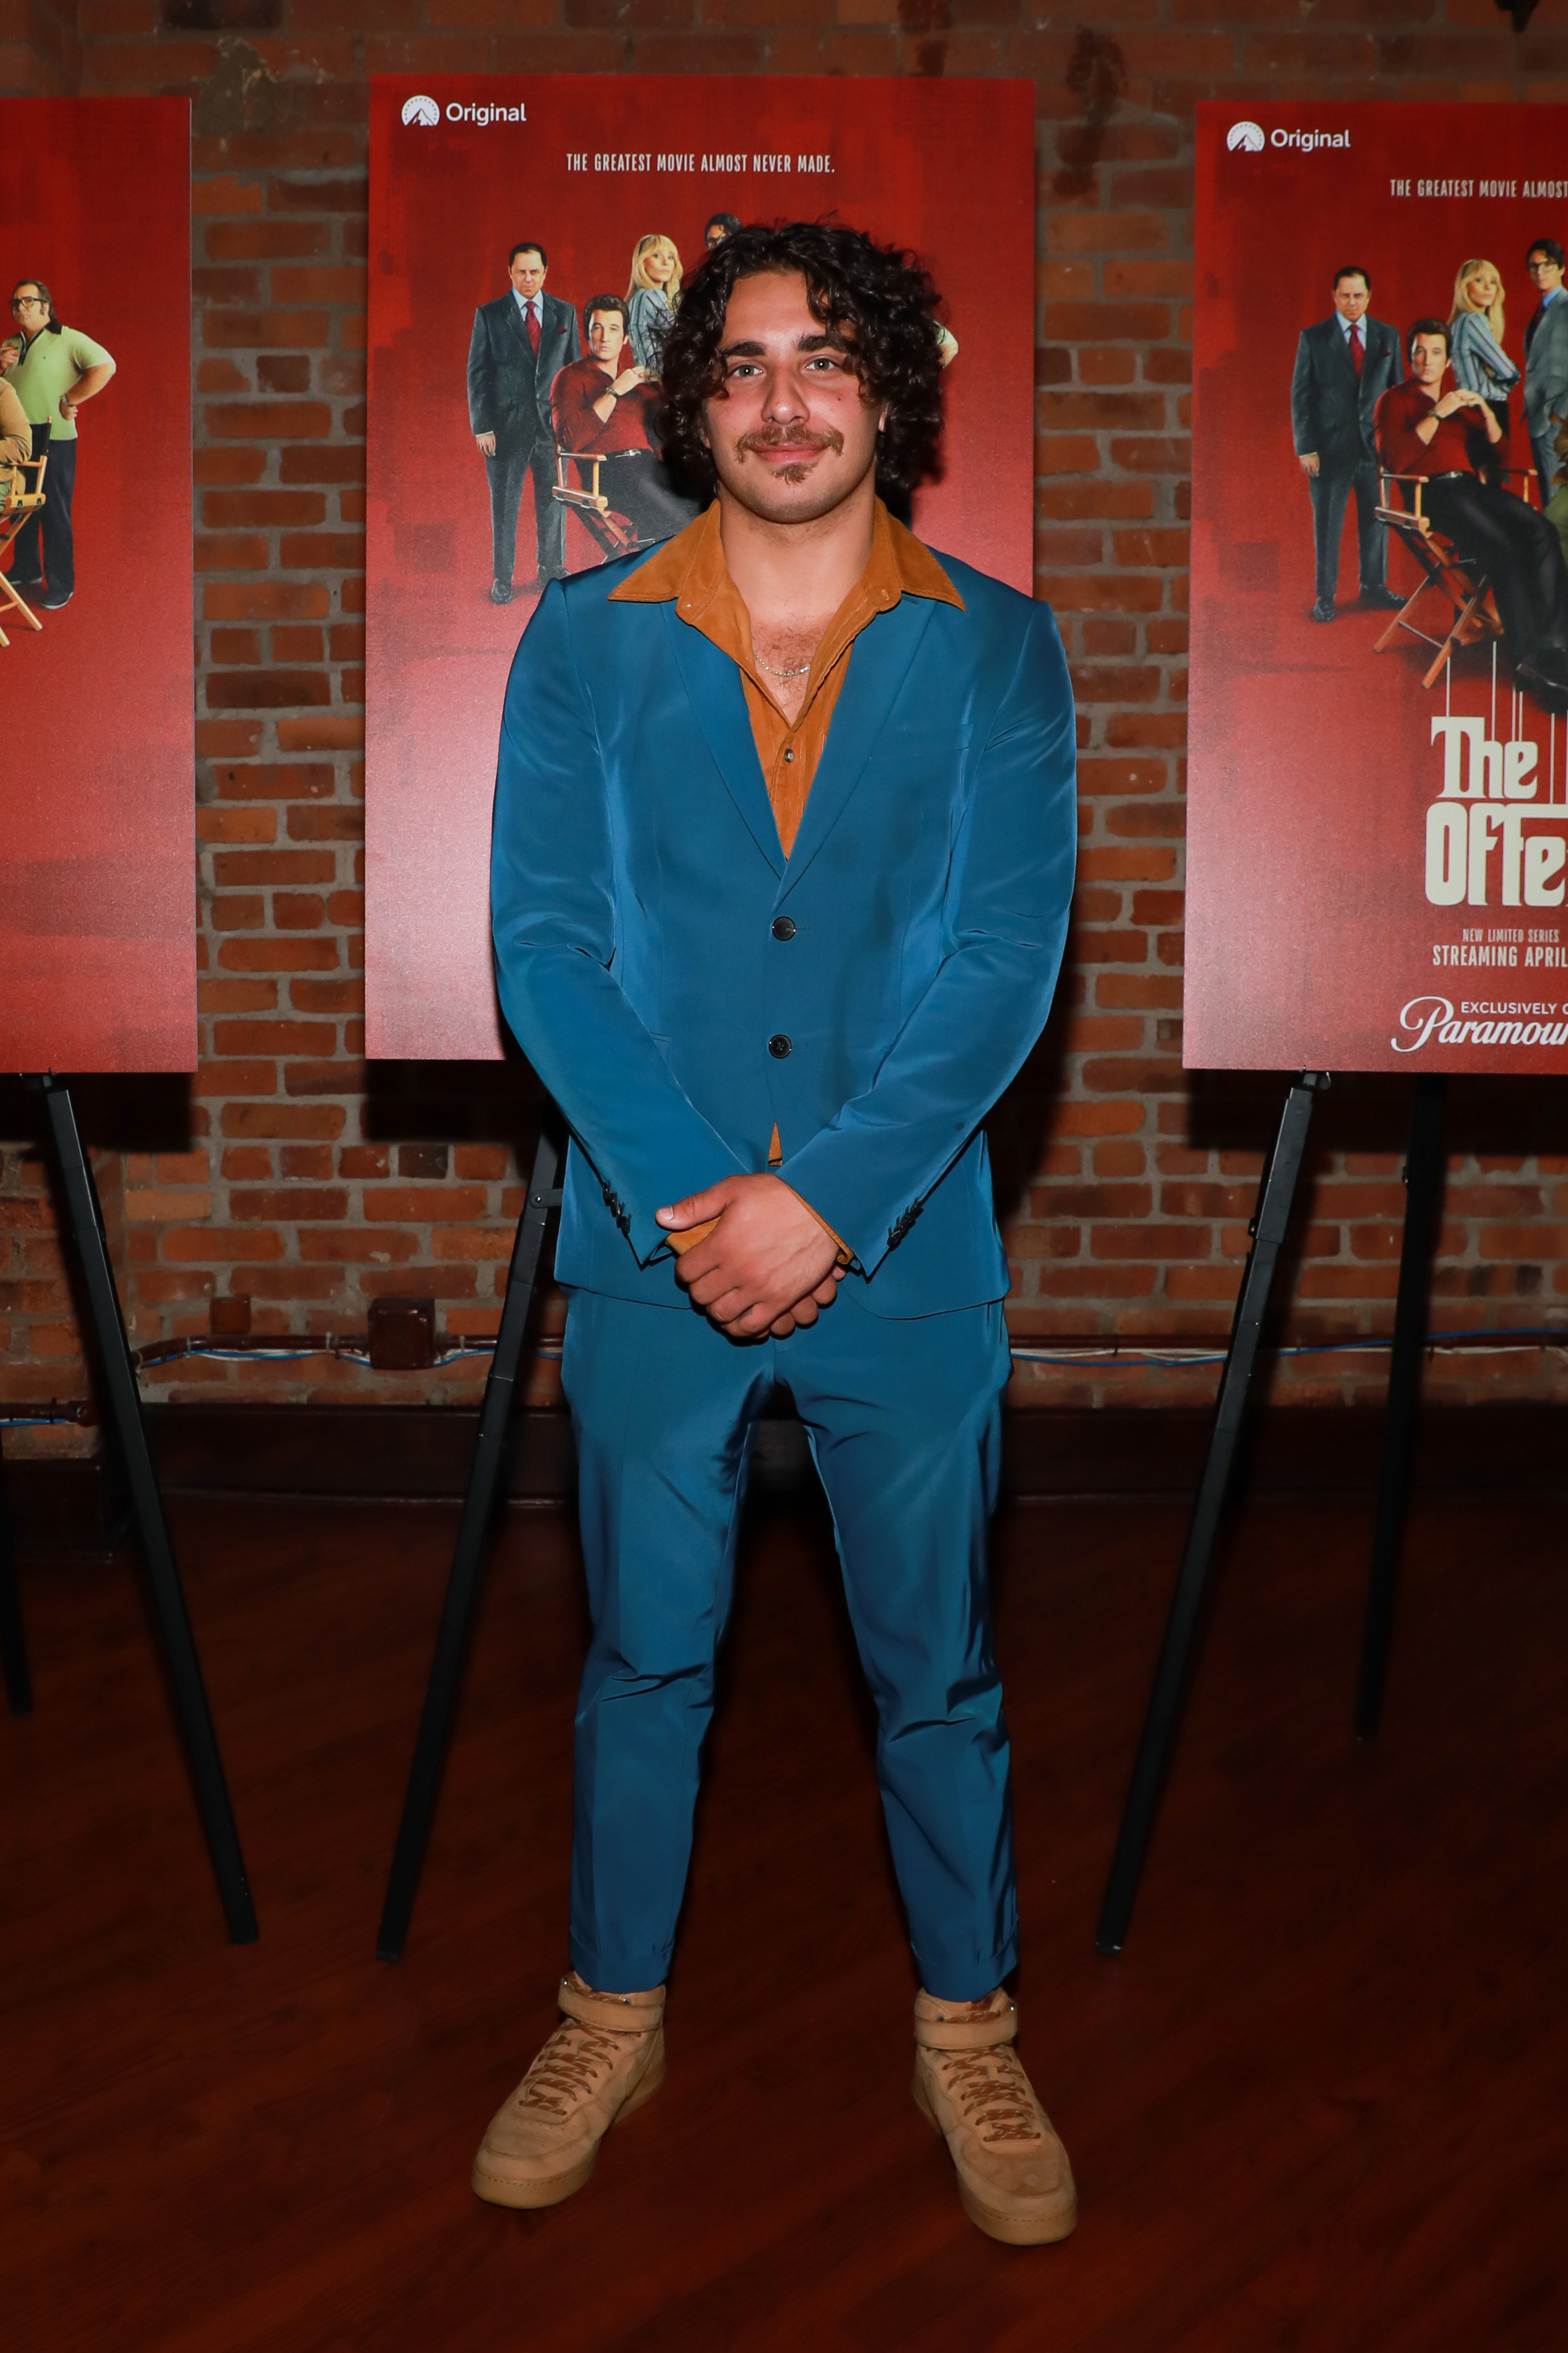 Jake smiling in a blue suit, no tie, on the red carpet